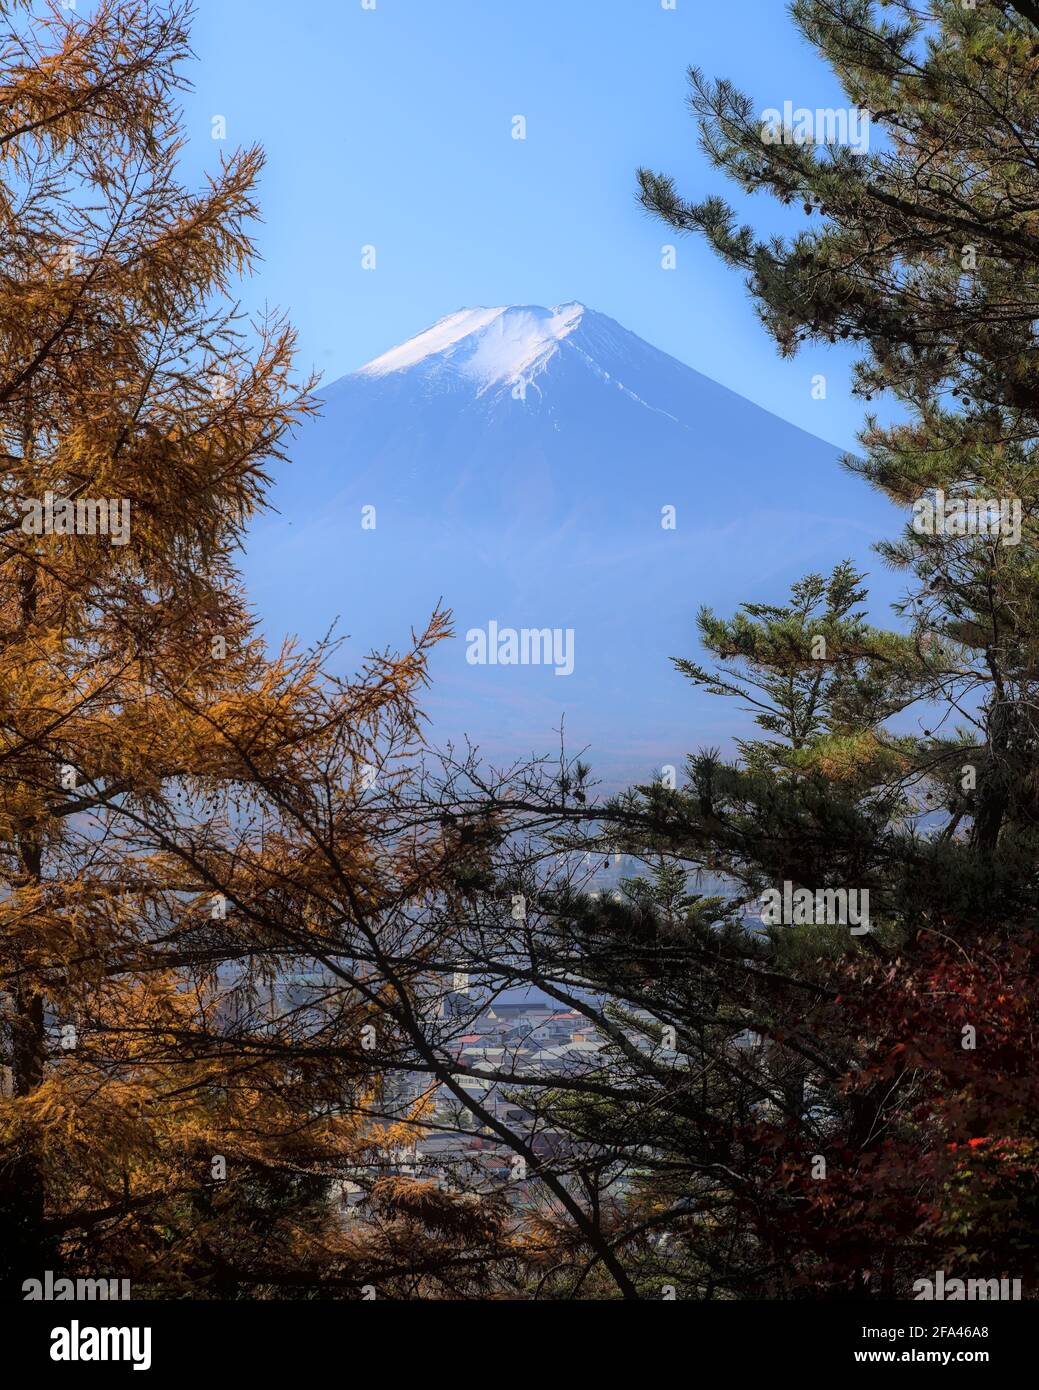 View of Mount Fuji through a break in the canopy of an autumnal forest under a blue sky, with part of the city of Fujiyoshida visible through the leav Stock Photo